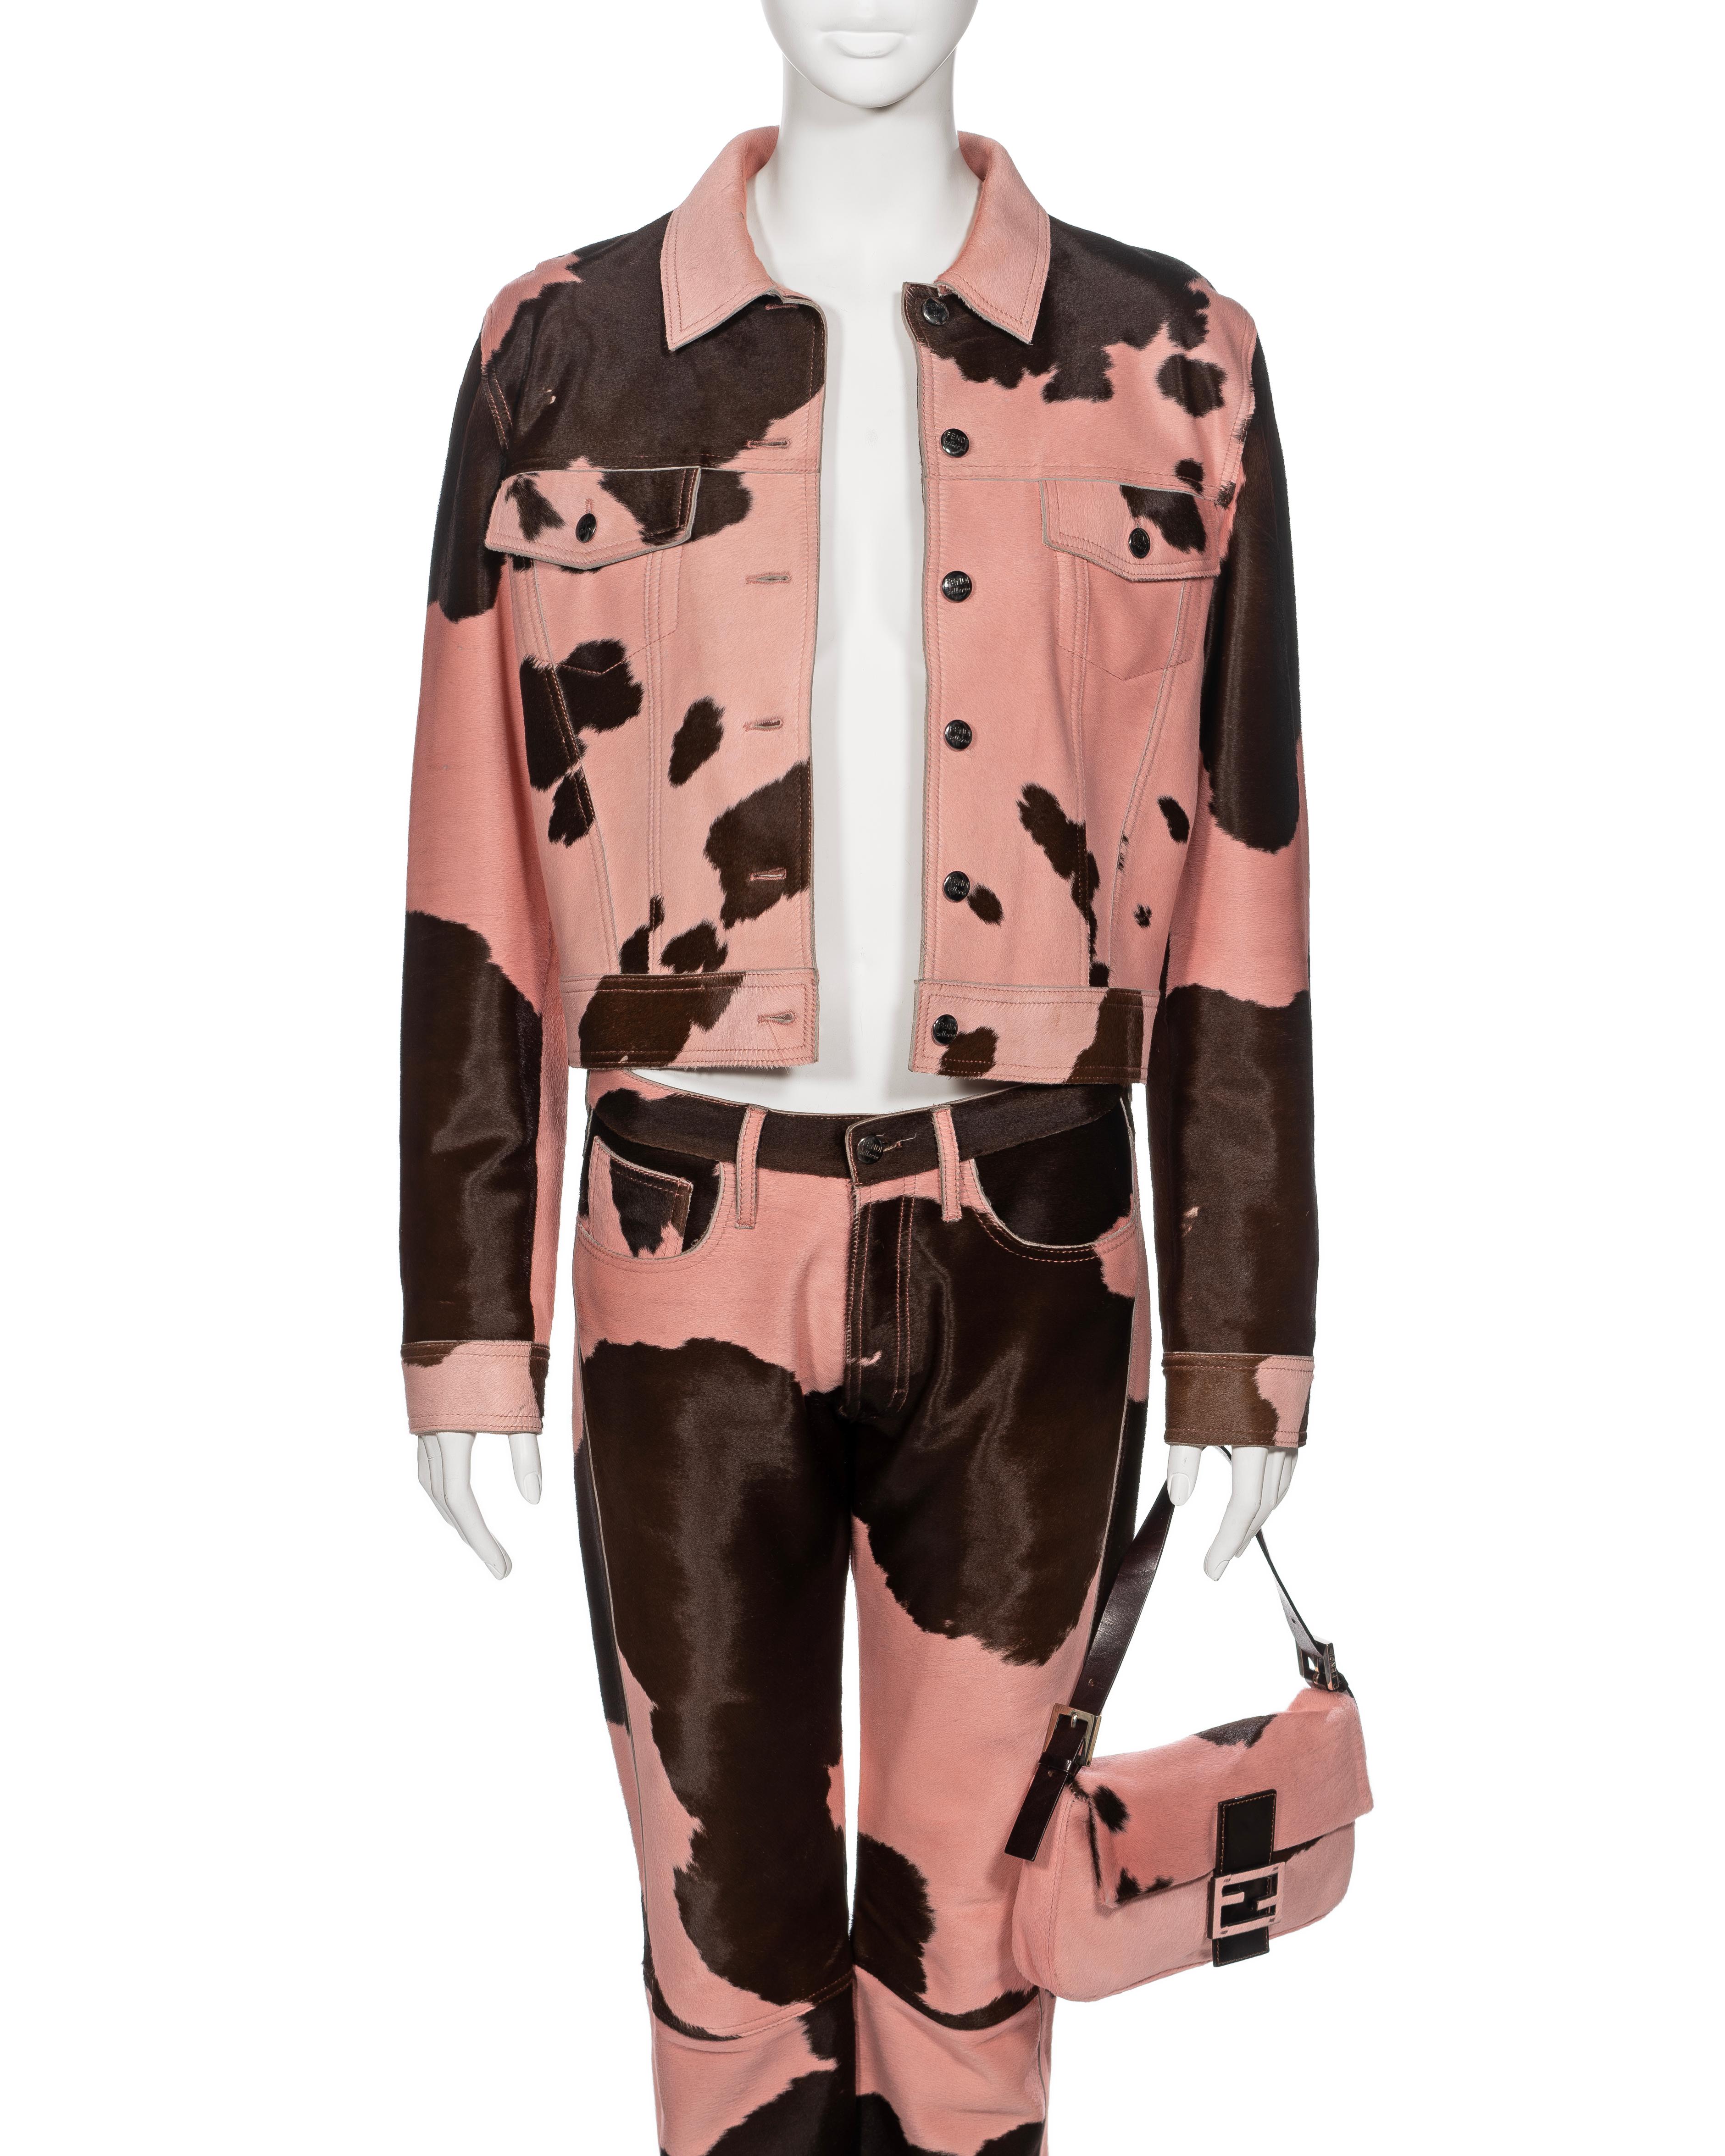 Fendi by Karl Lagerfeld Pink Cowhide Jacket, Pants and Baguette Bag Set, FW 1999 In Good Condition For Sale In London, GB